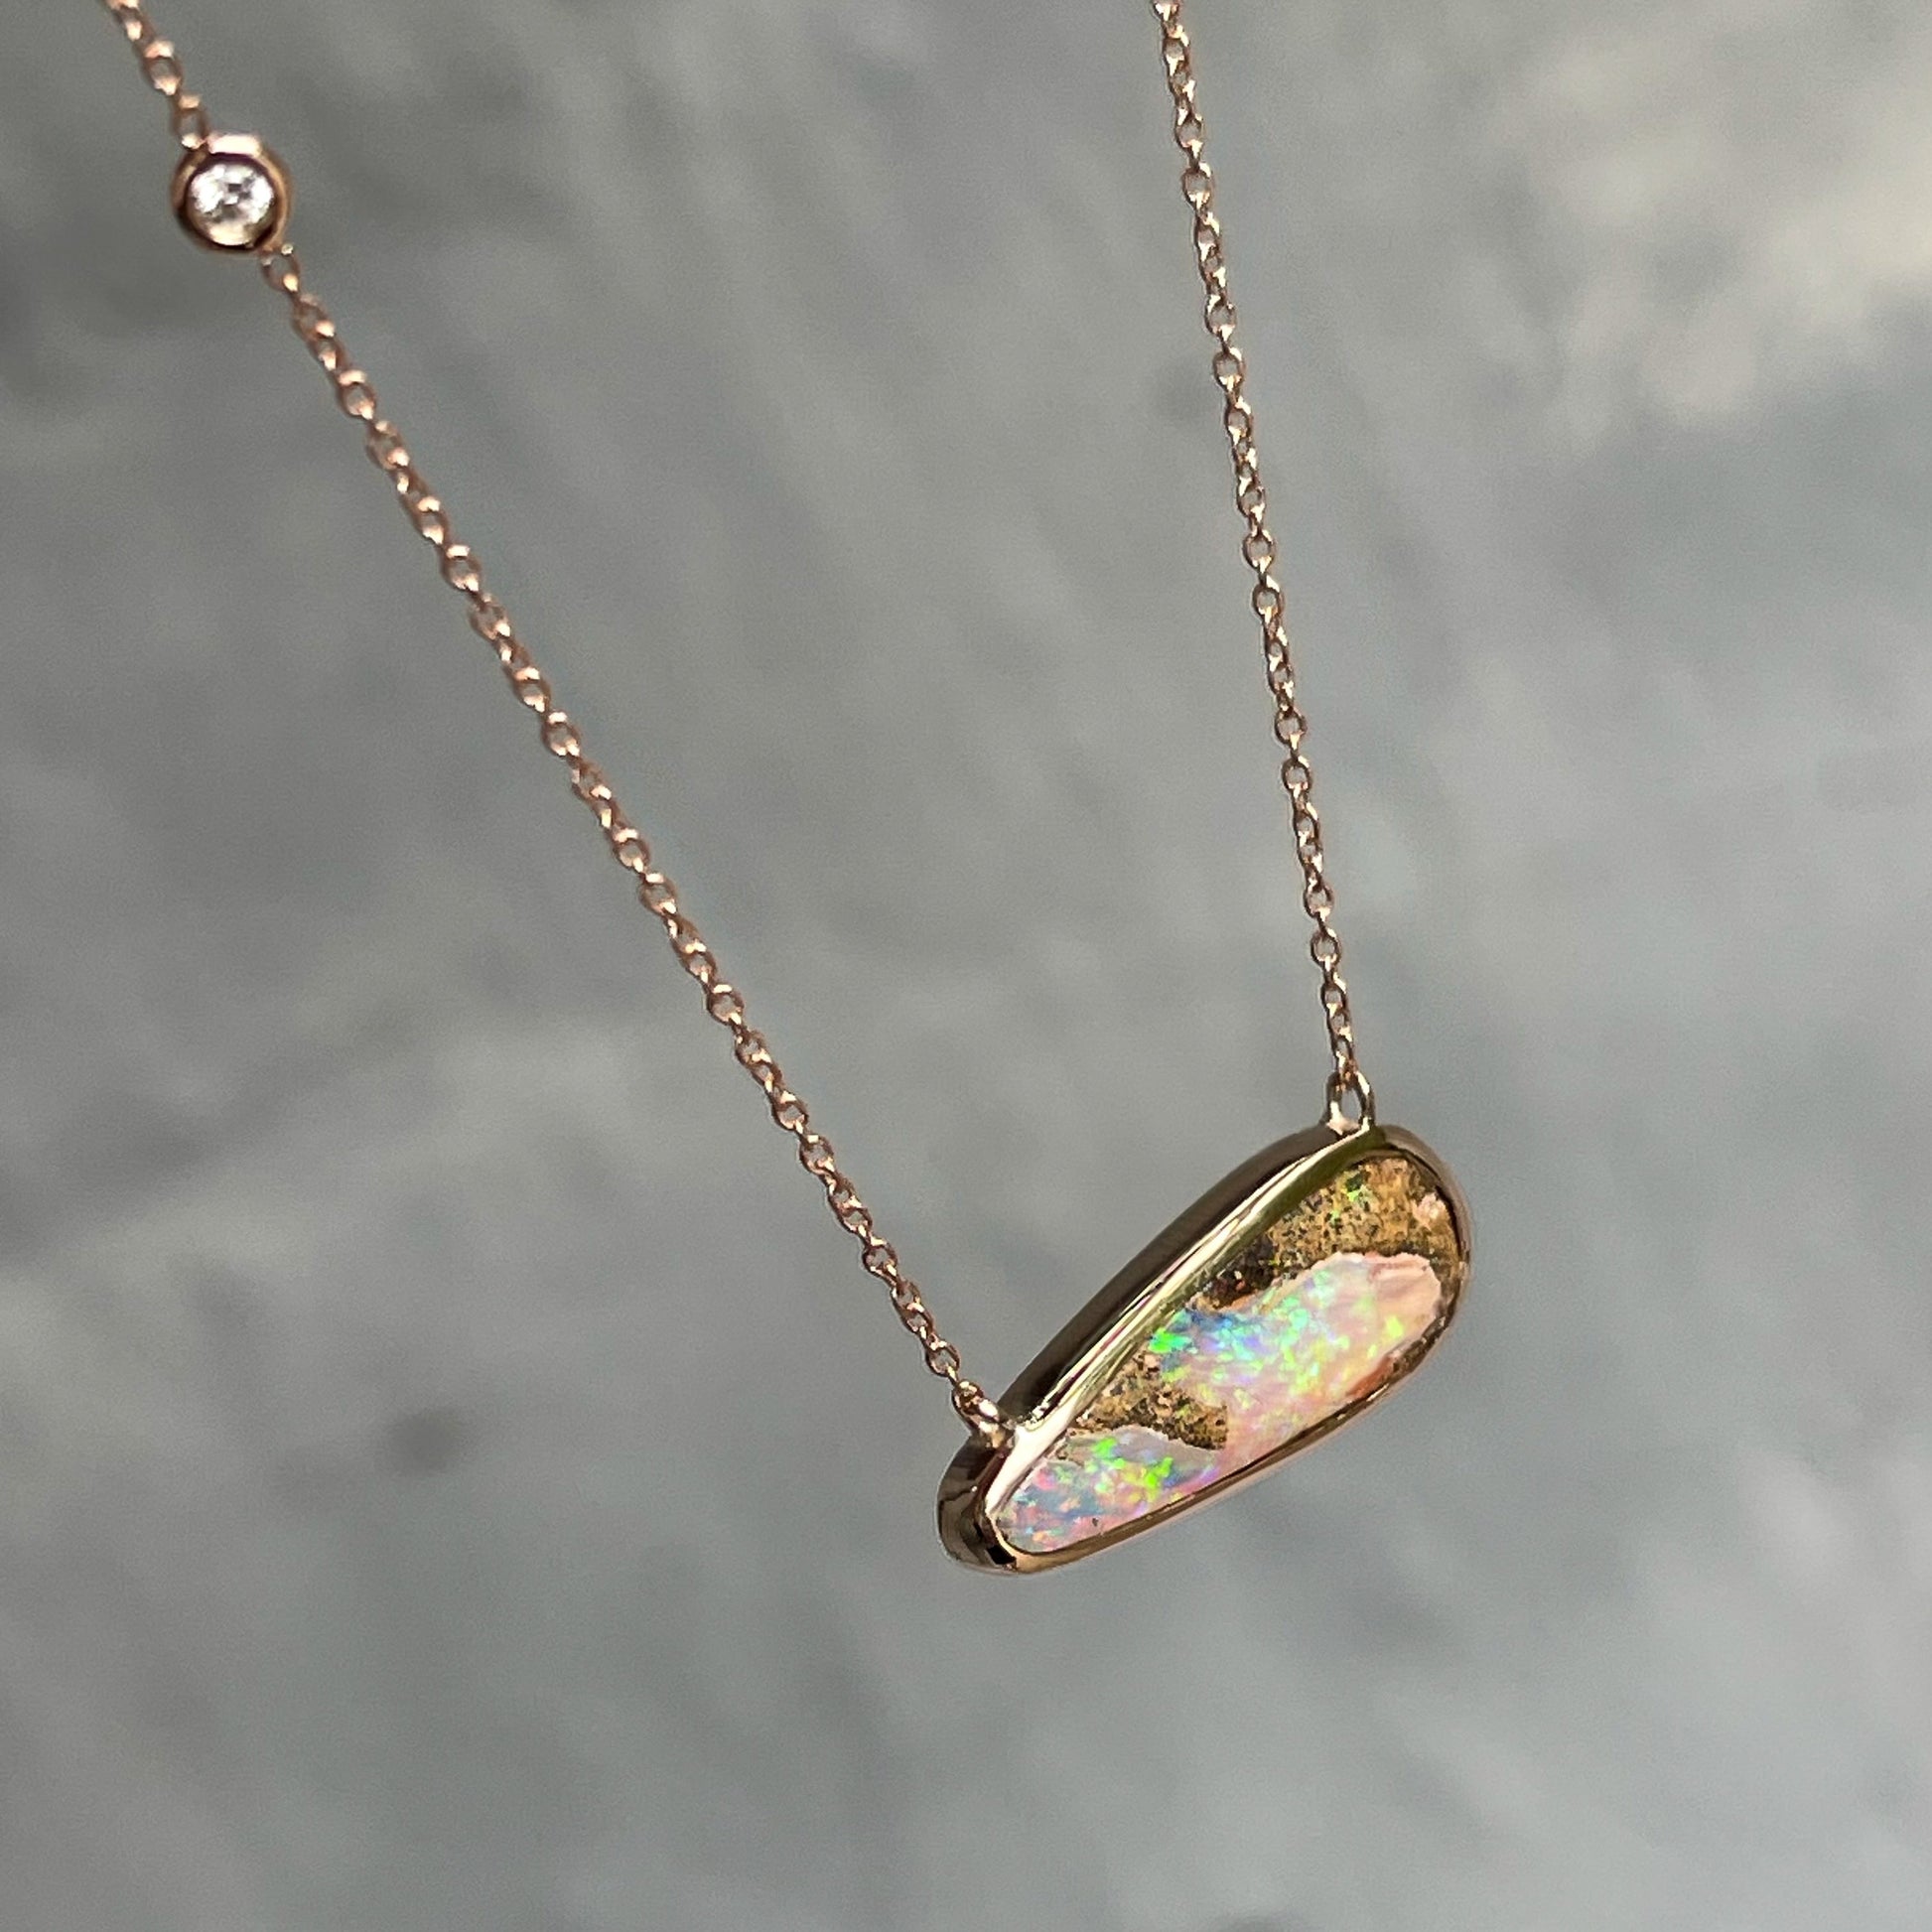 An Australian Opal Necklace by NIXIN Jewelry shot from above showing the top of its bezel and the diamond set into its chain. The 14k rose gold opal pendant necklace is 18" long with a 17" adjuster.